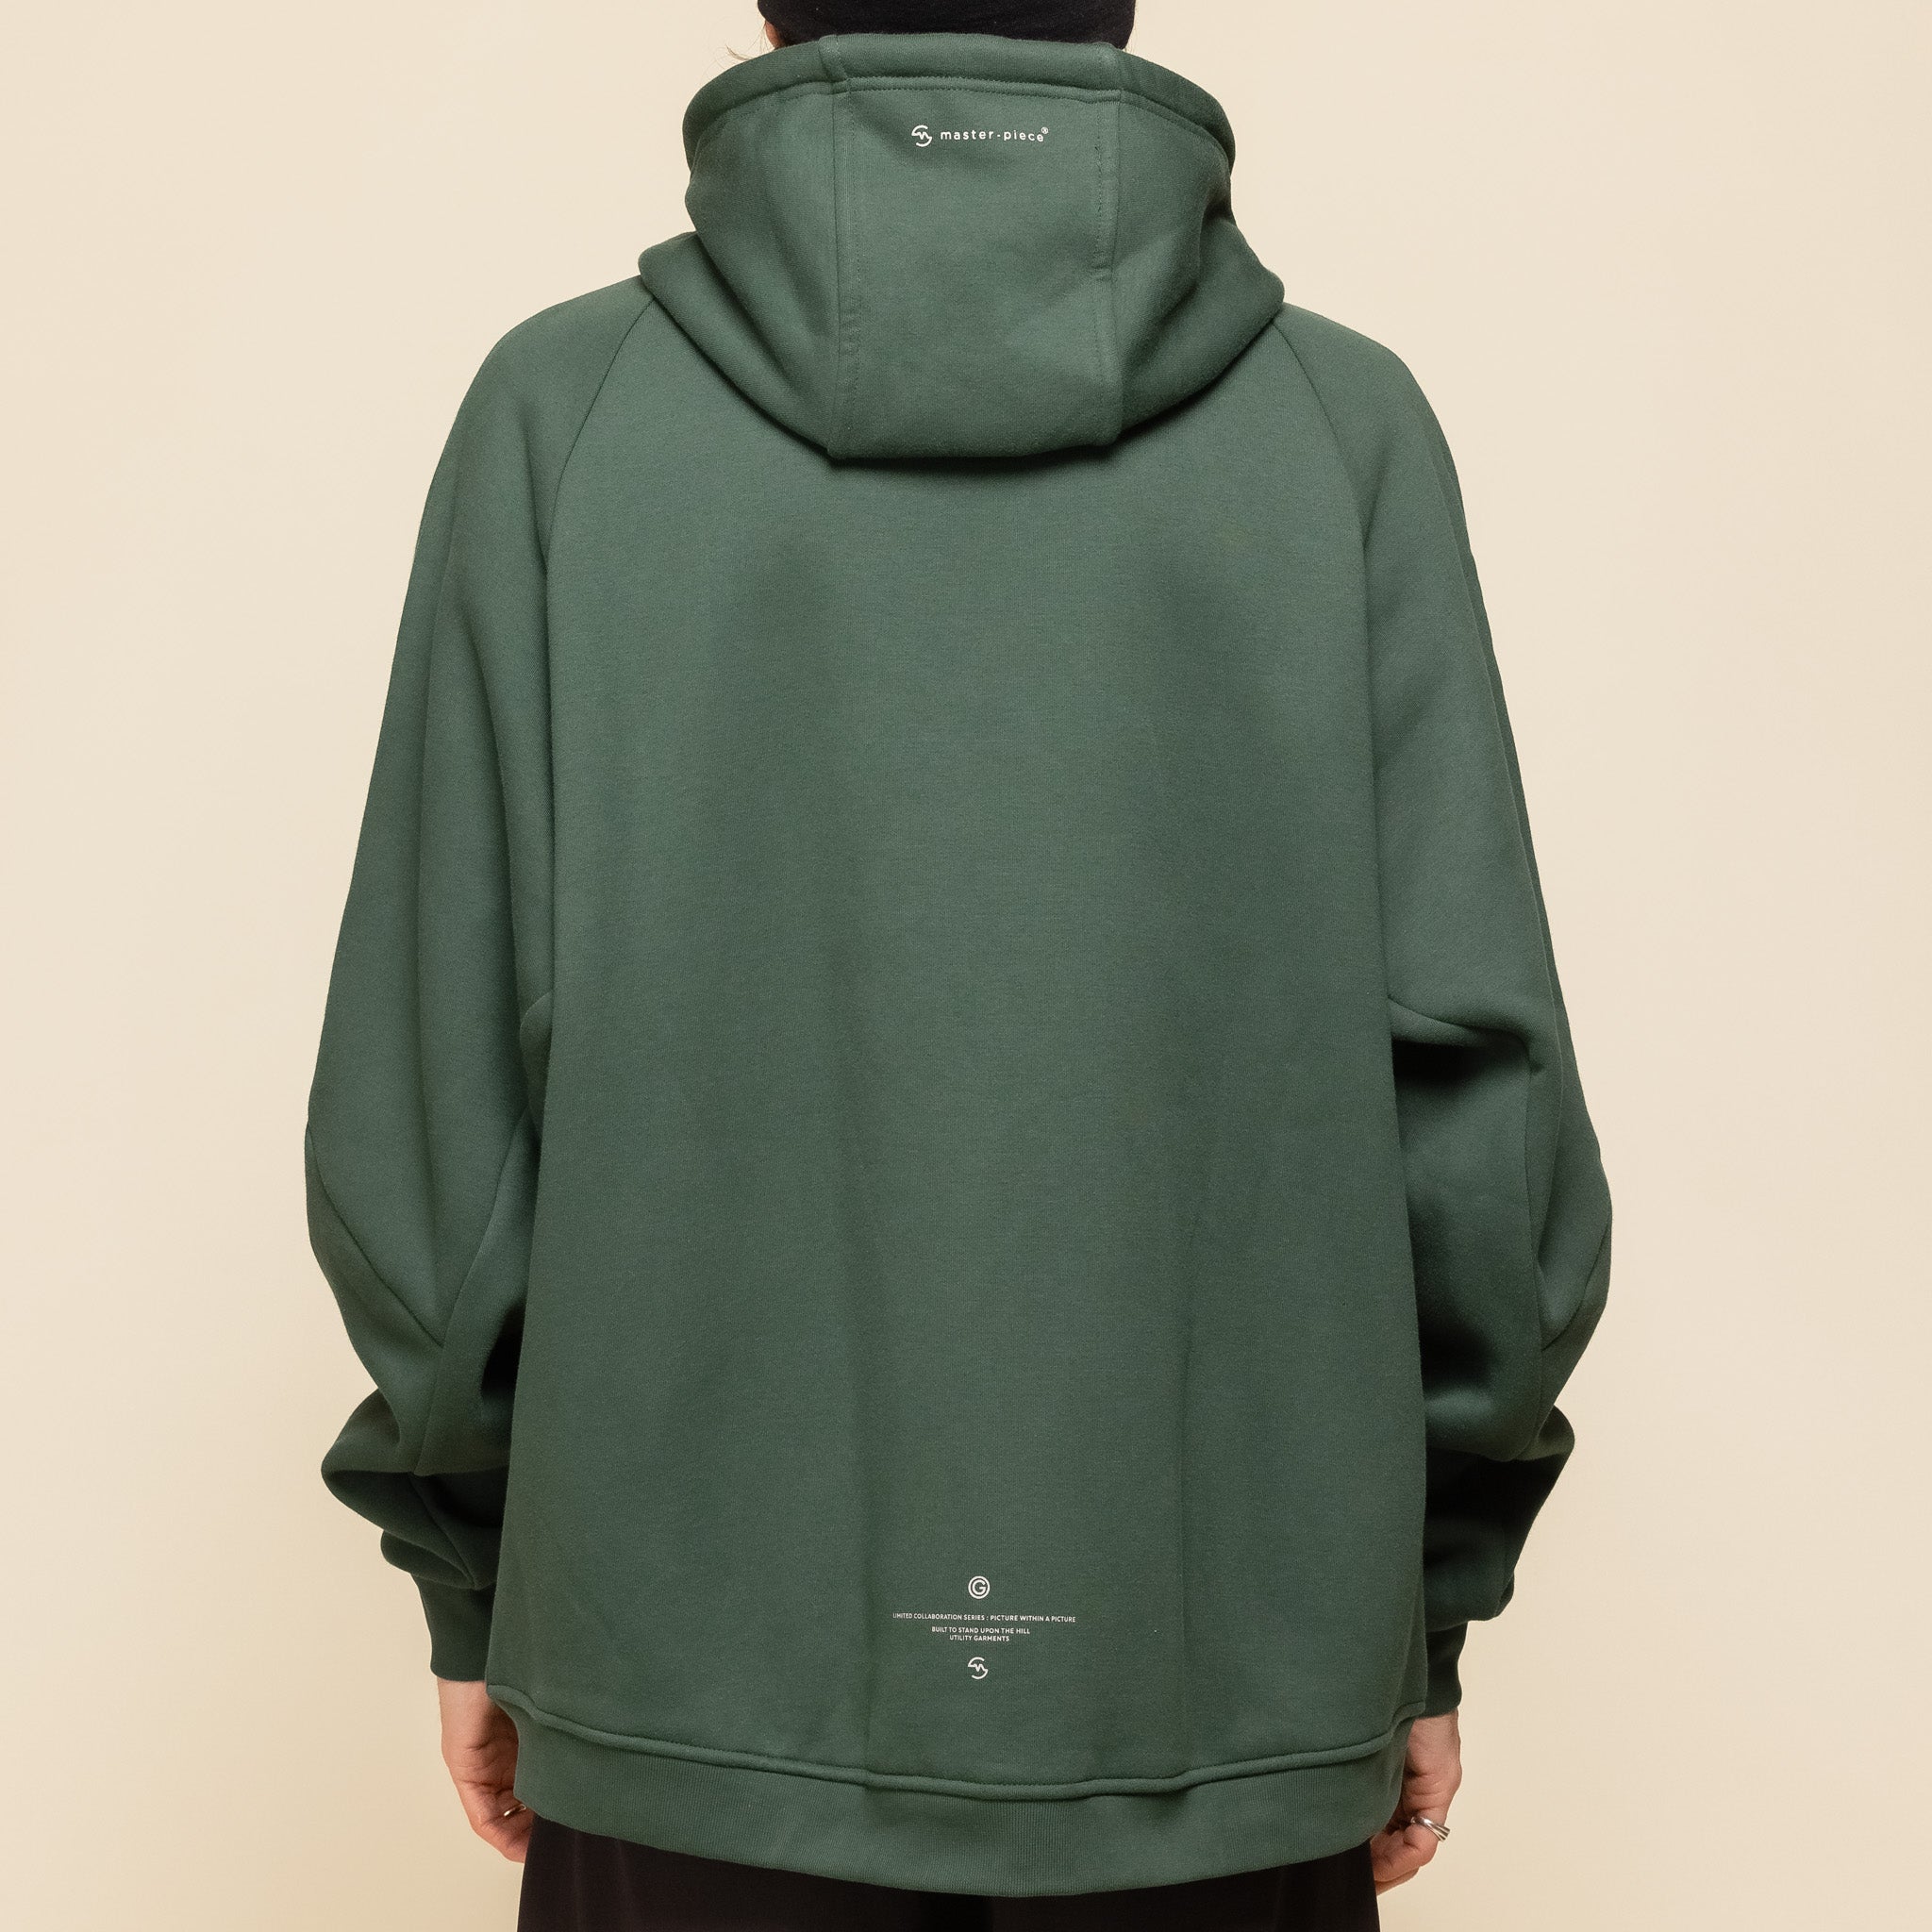 GOOPiMADE - “MEquip-H3” Mantle Logo Hooded Jacket - Green